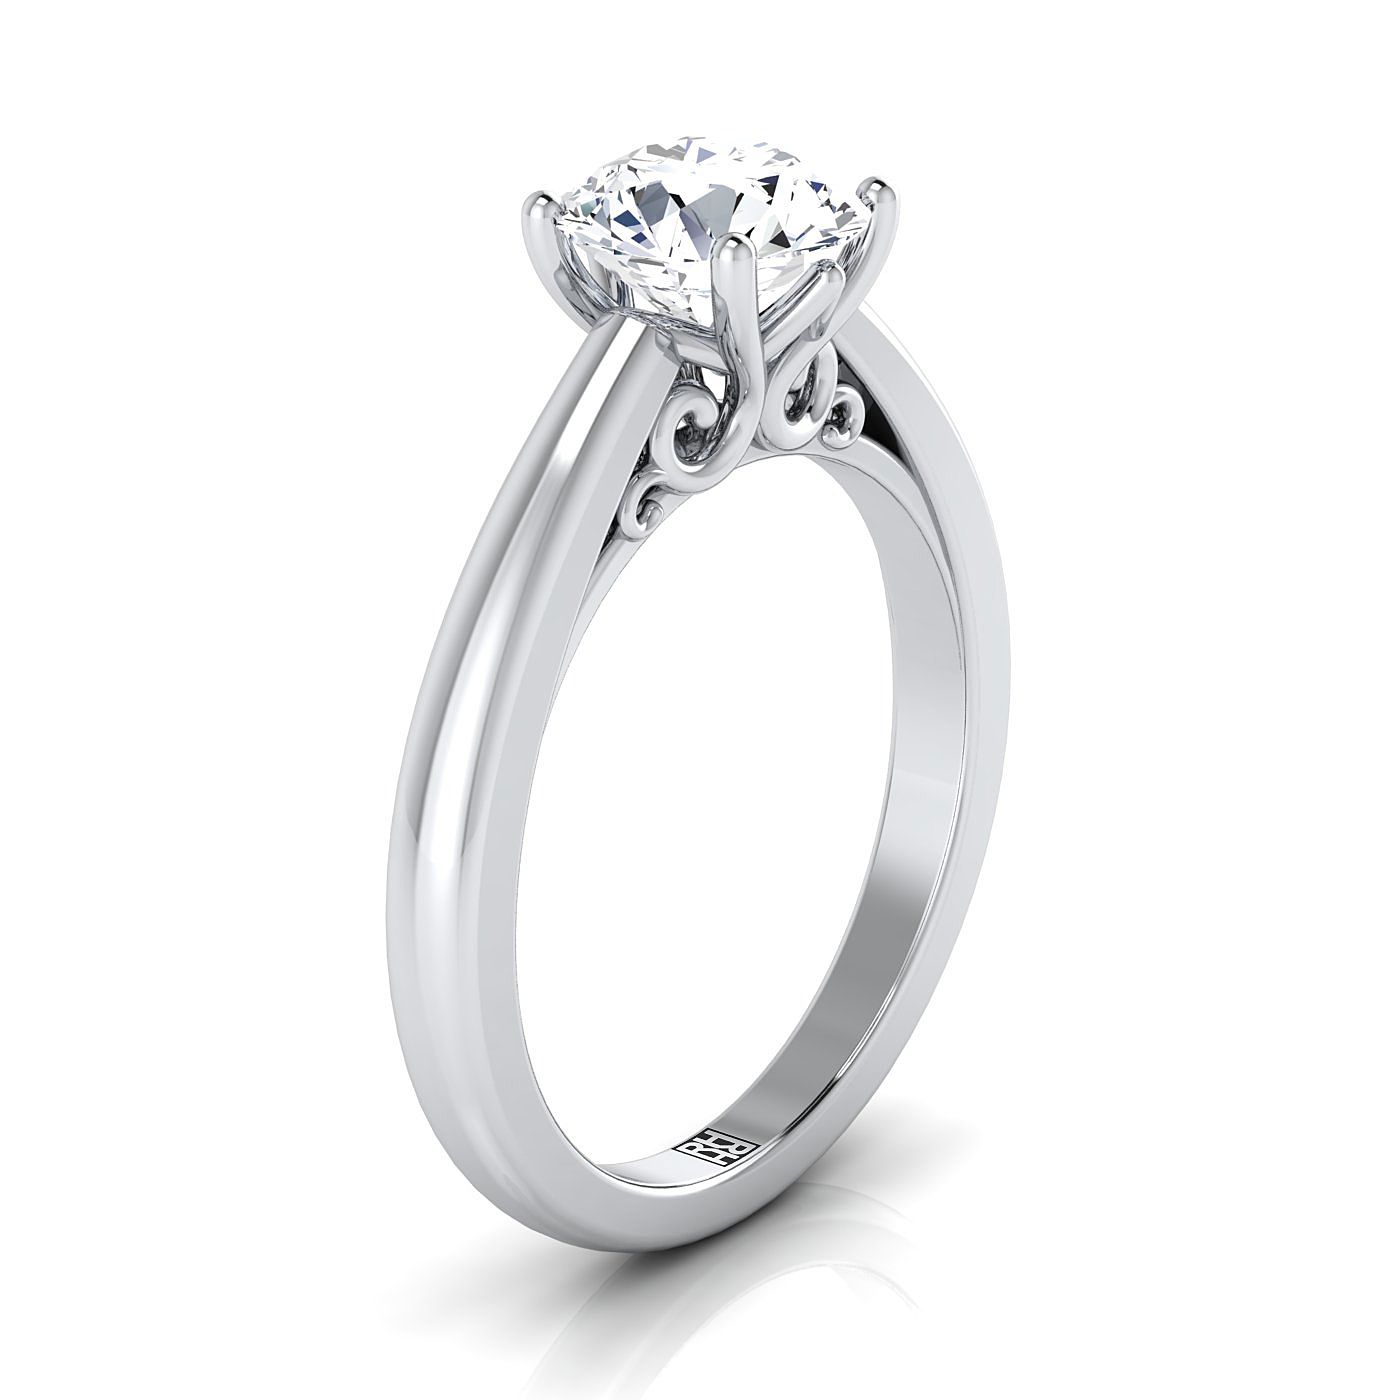 14K White Gold Round Brilliant Scroll Gallery Comfort Fit Solitaire Engagement Ring